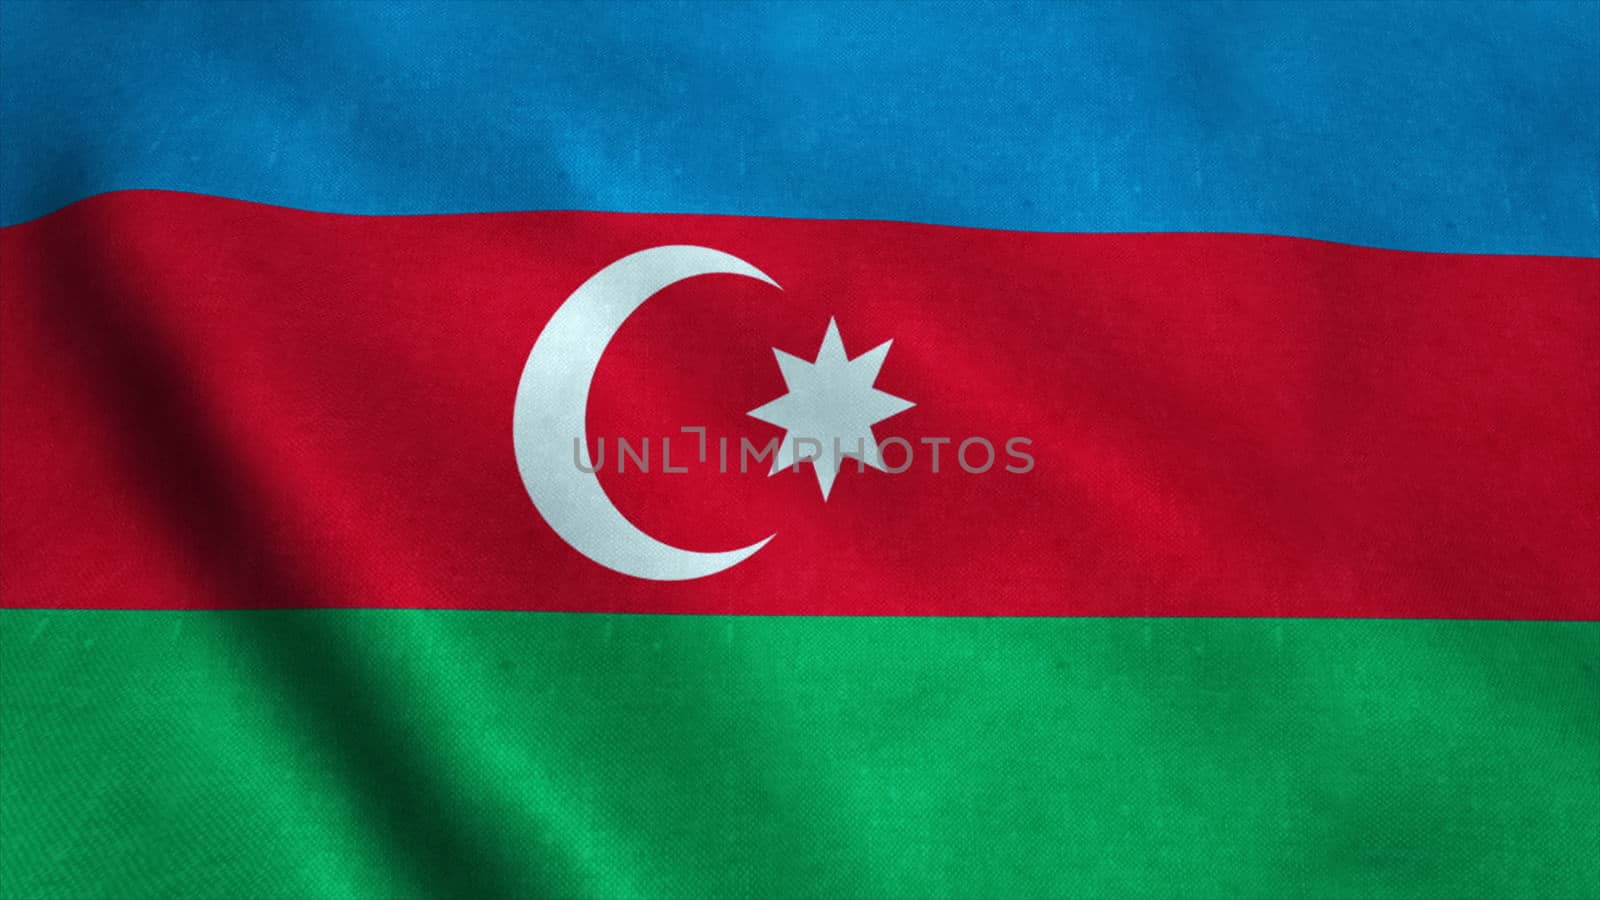 Realistic Ultra-HD flag of the Azerbaijan waving in the wind. Seamless loop with highly detailed fabric texture. Loop ready in 4k resolution.